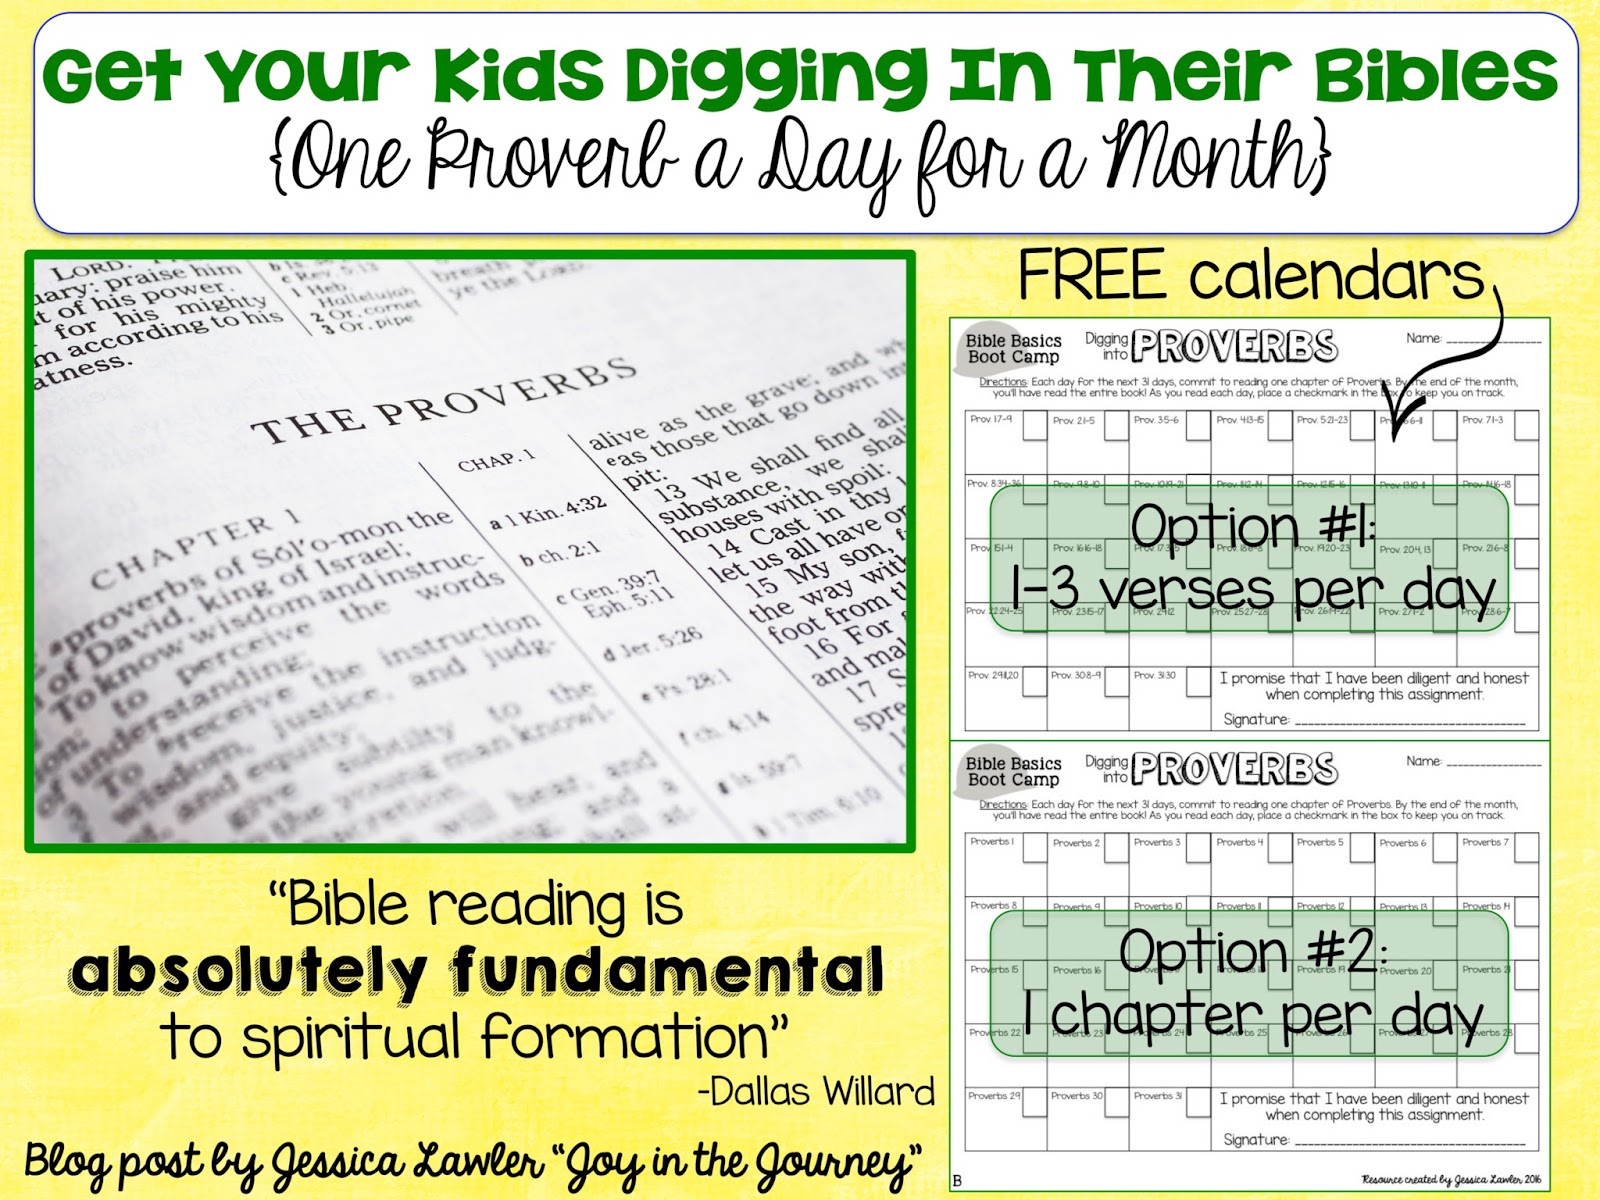 Get your kids digging in their Bibles - FREE reading calendars to read through Proverbs in a month. Blog post includes calendar options for both younger and older kids. Resource created by Jessica Lawler, "Joy in the Journey"